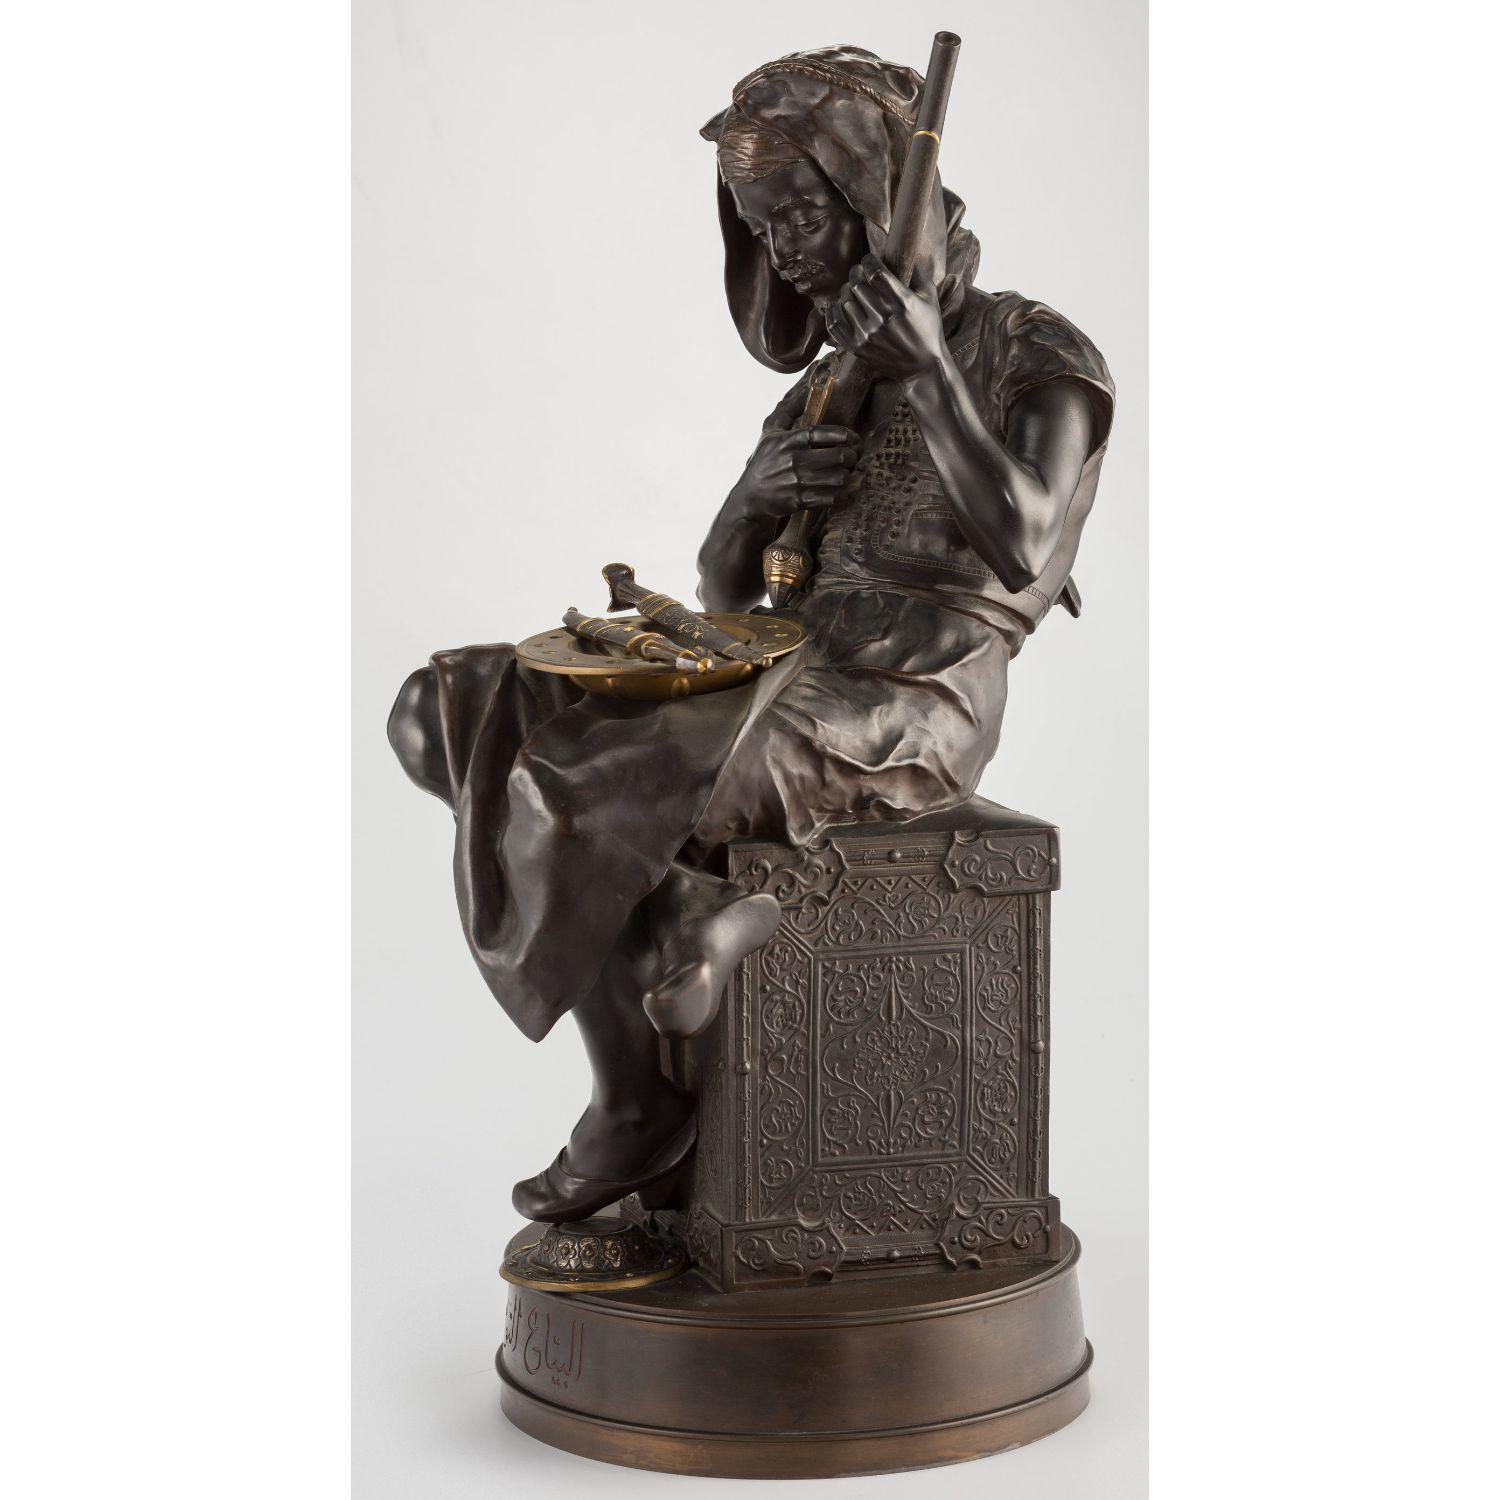 Émile-Edmond Peynot, (French, 1850 -1932)

An exceptional, exquisite and rare orientalist bronze sculpture titled Albaya' El Tunsi / The Tunisian Merchant / The Arab rifleman. 

Depicting a young Arab cleaning his flintlock pistol. 

Size: 26